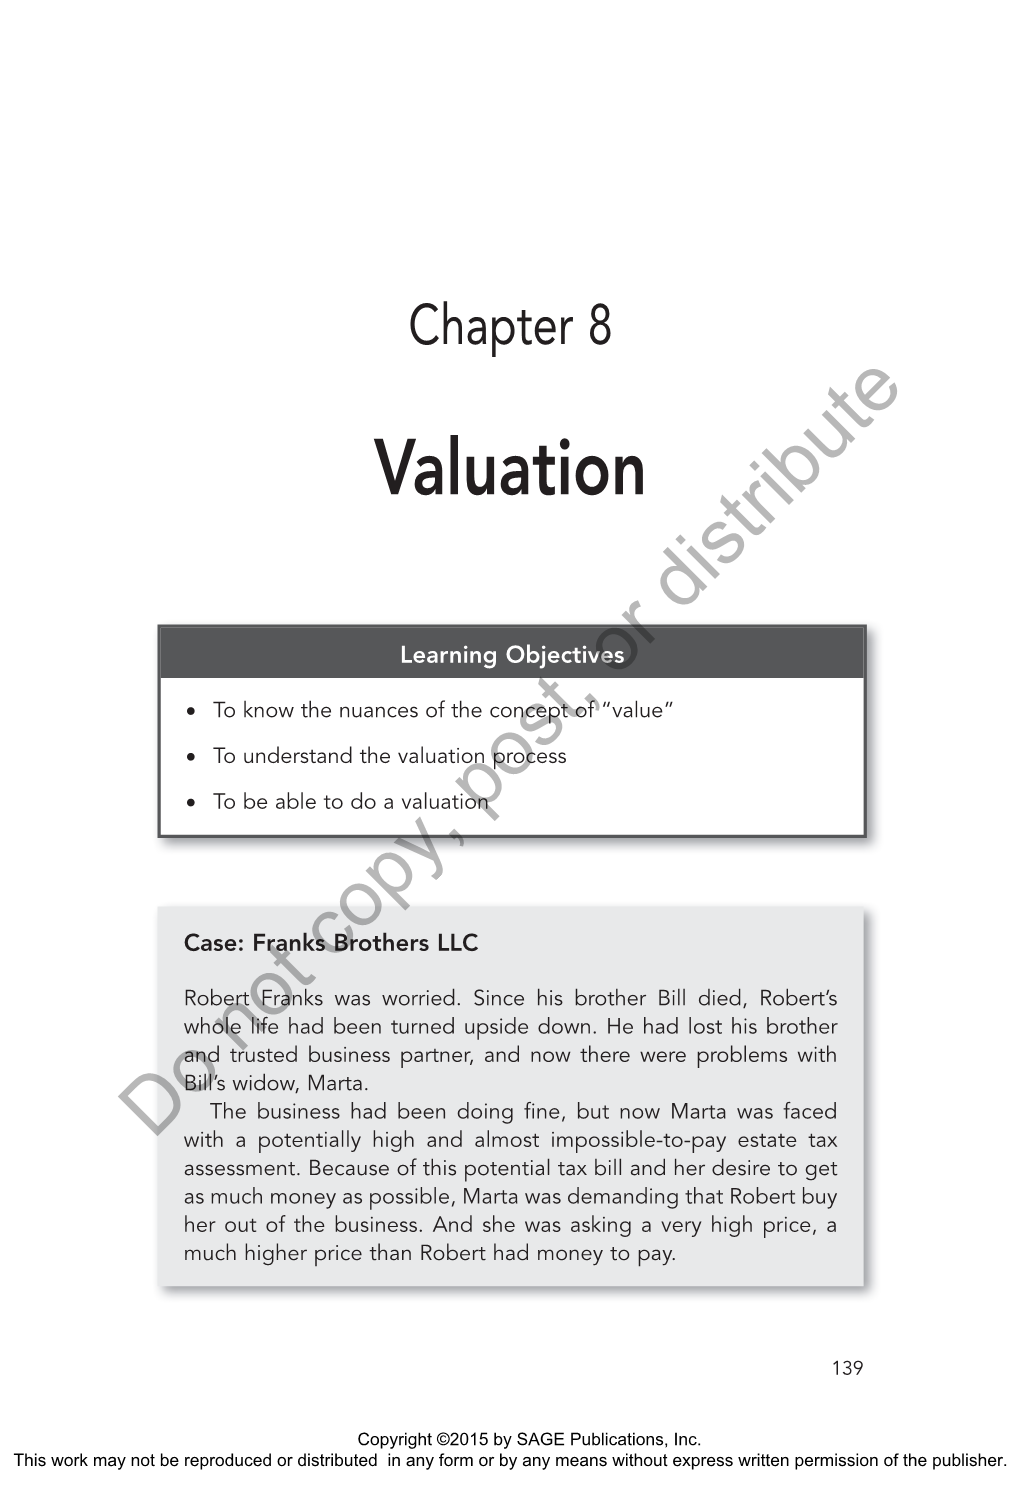 Chapter 8 Valuation